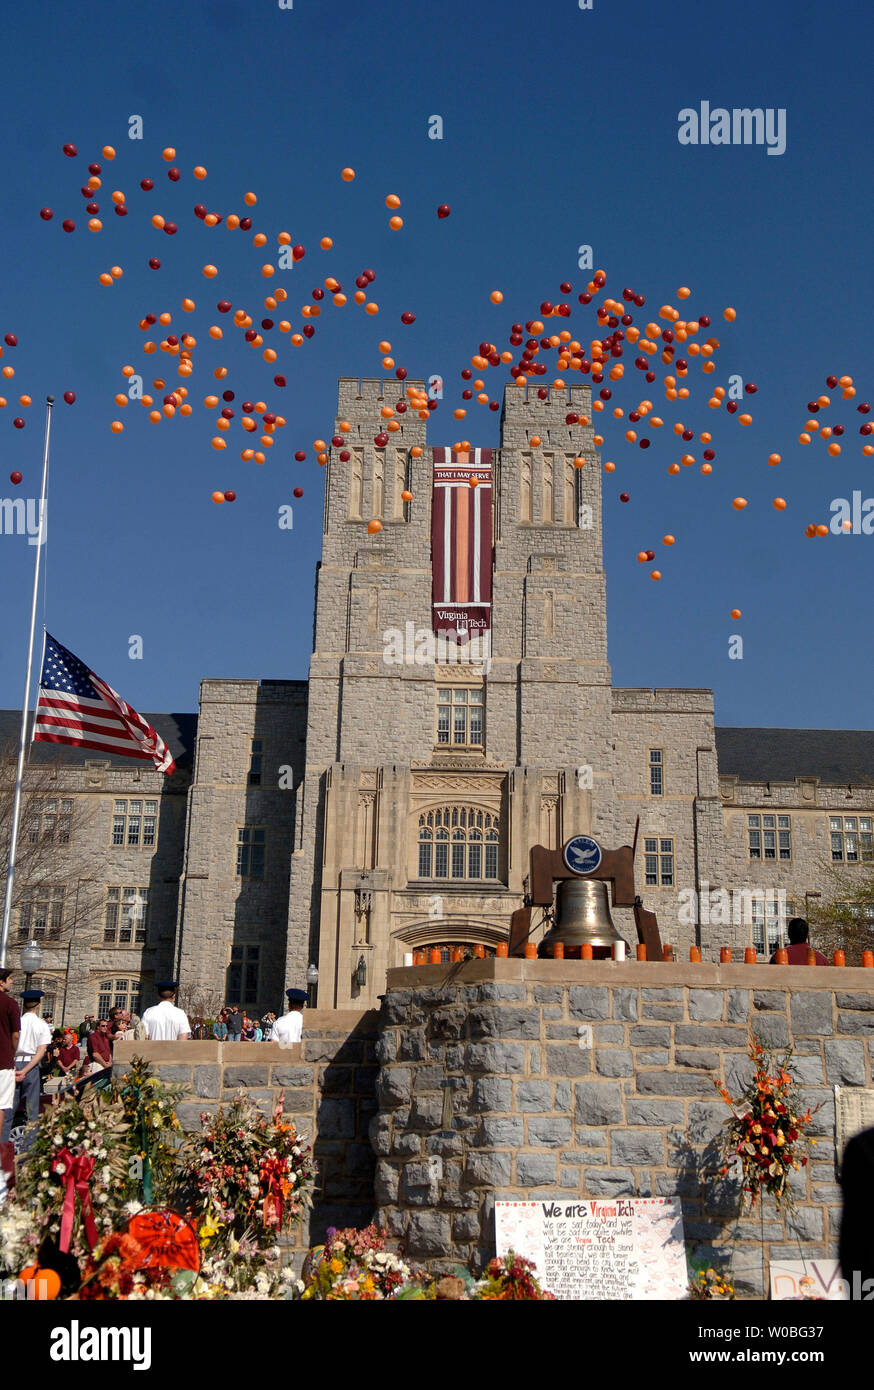 Balloons are released in front of Burruss Hall during a ceremony for the 32 victims of last Mondays shooting, on the campus of Virginia Tech in Blacksburg, Virginia on April 23, 2007. Cho Seung-Hui, a student at Virginia Tech, went on a shooting spree and killed 32 people on April 16, 2007. Today was the first day of classes since the shooting. (UPI Photo/Kevin Dietsch) Stock Photo